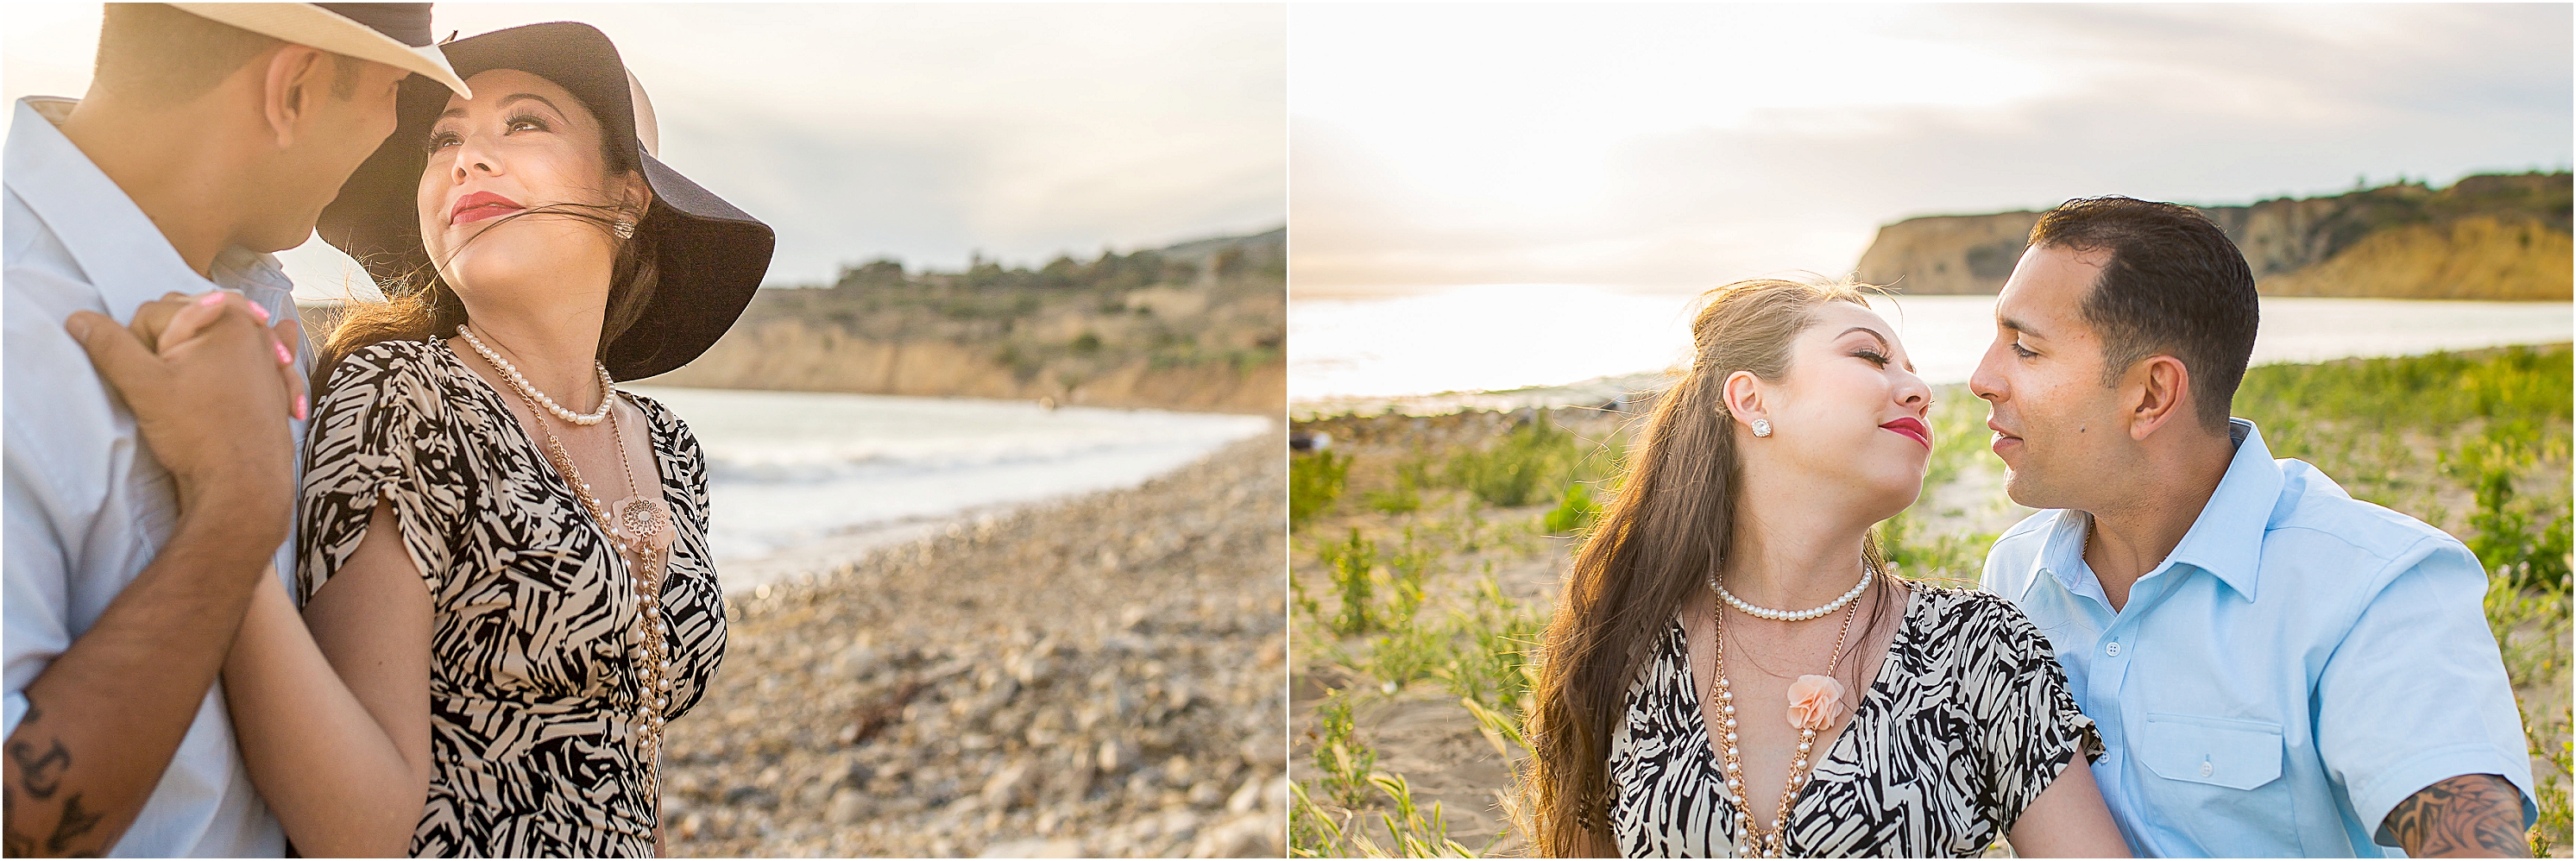 Golden hour engagement photos at the beach